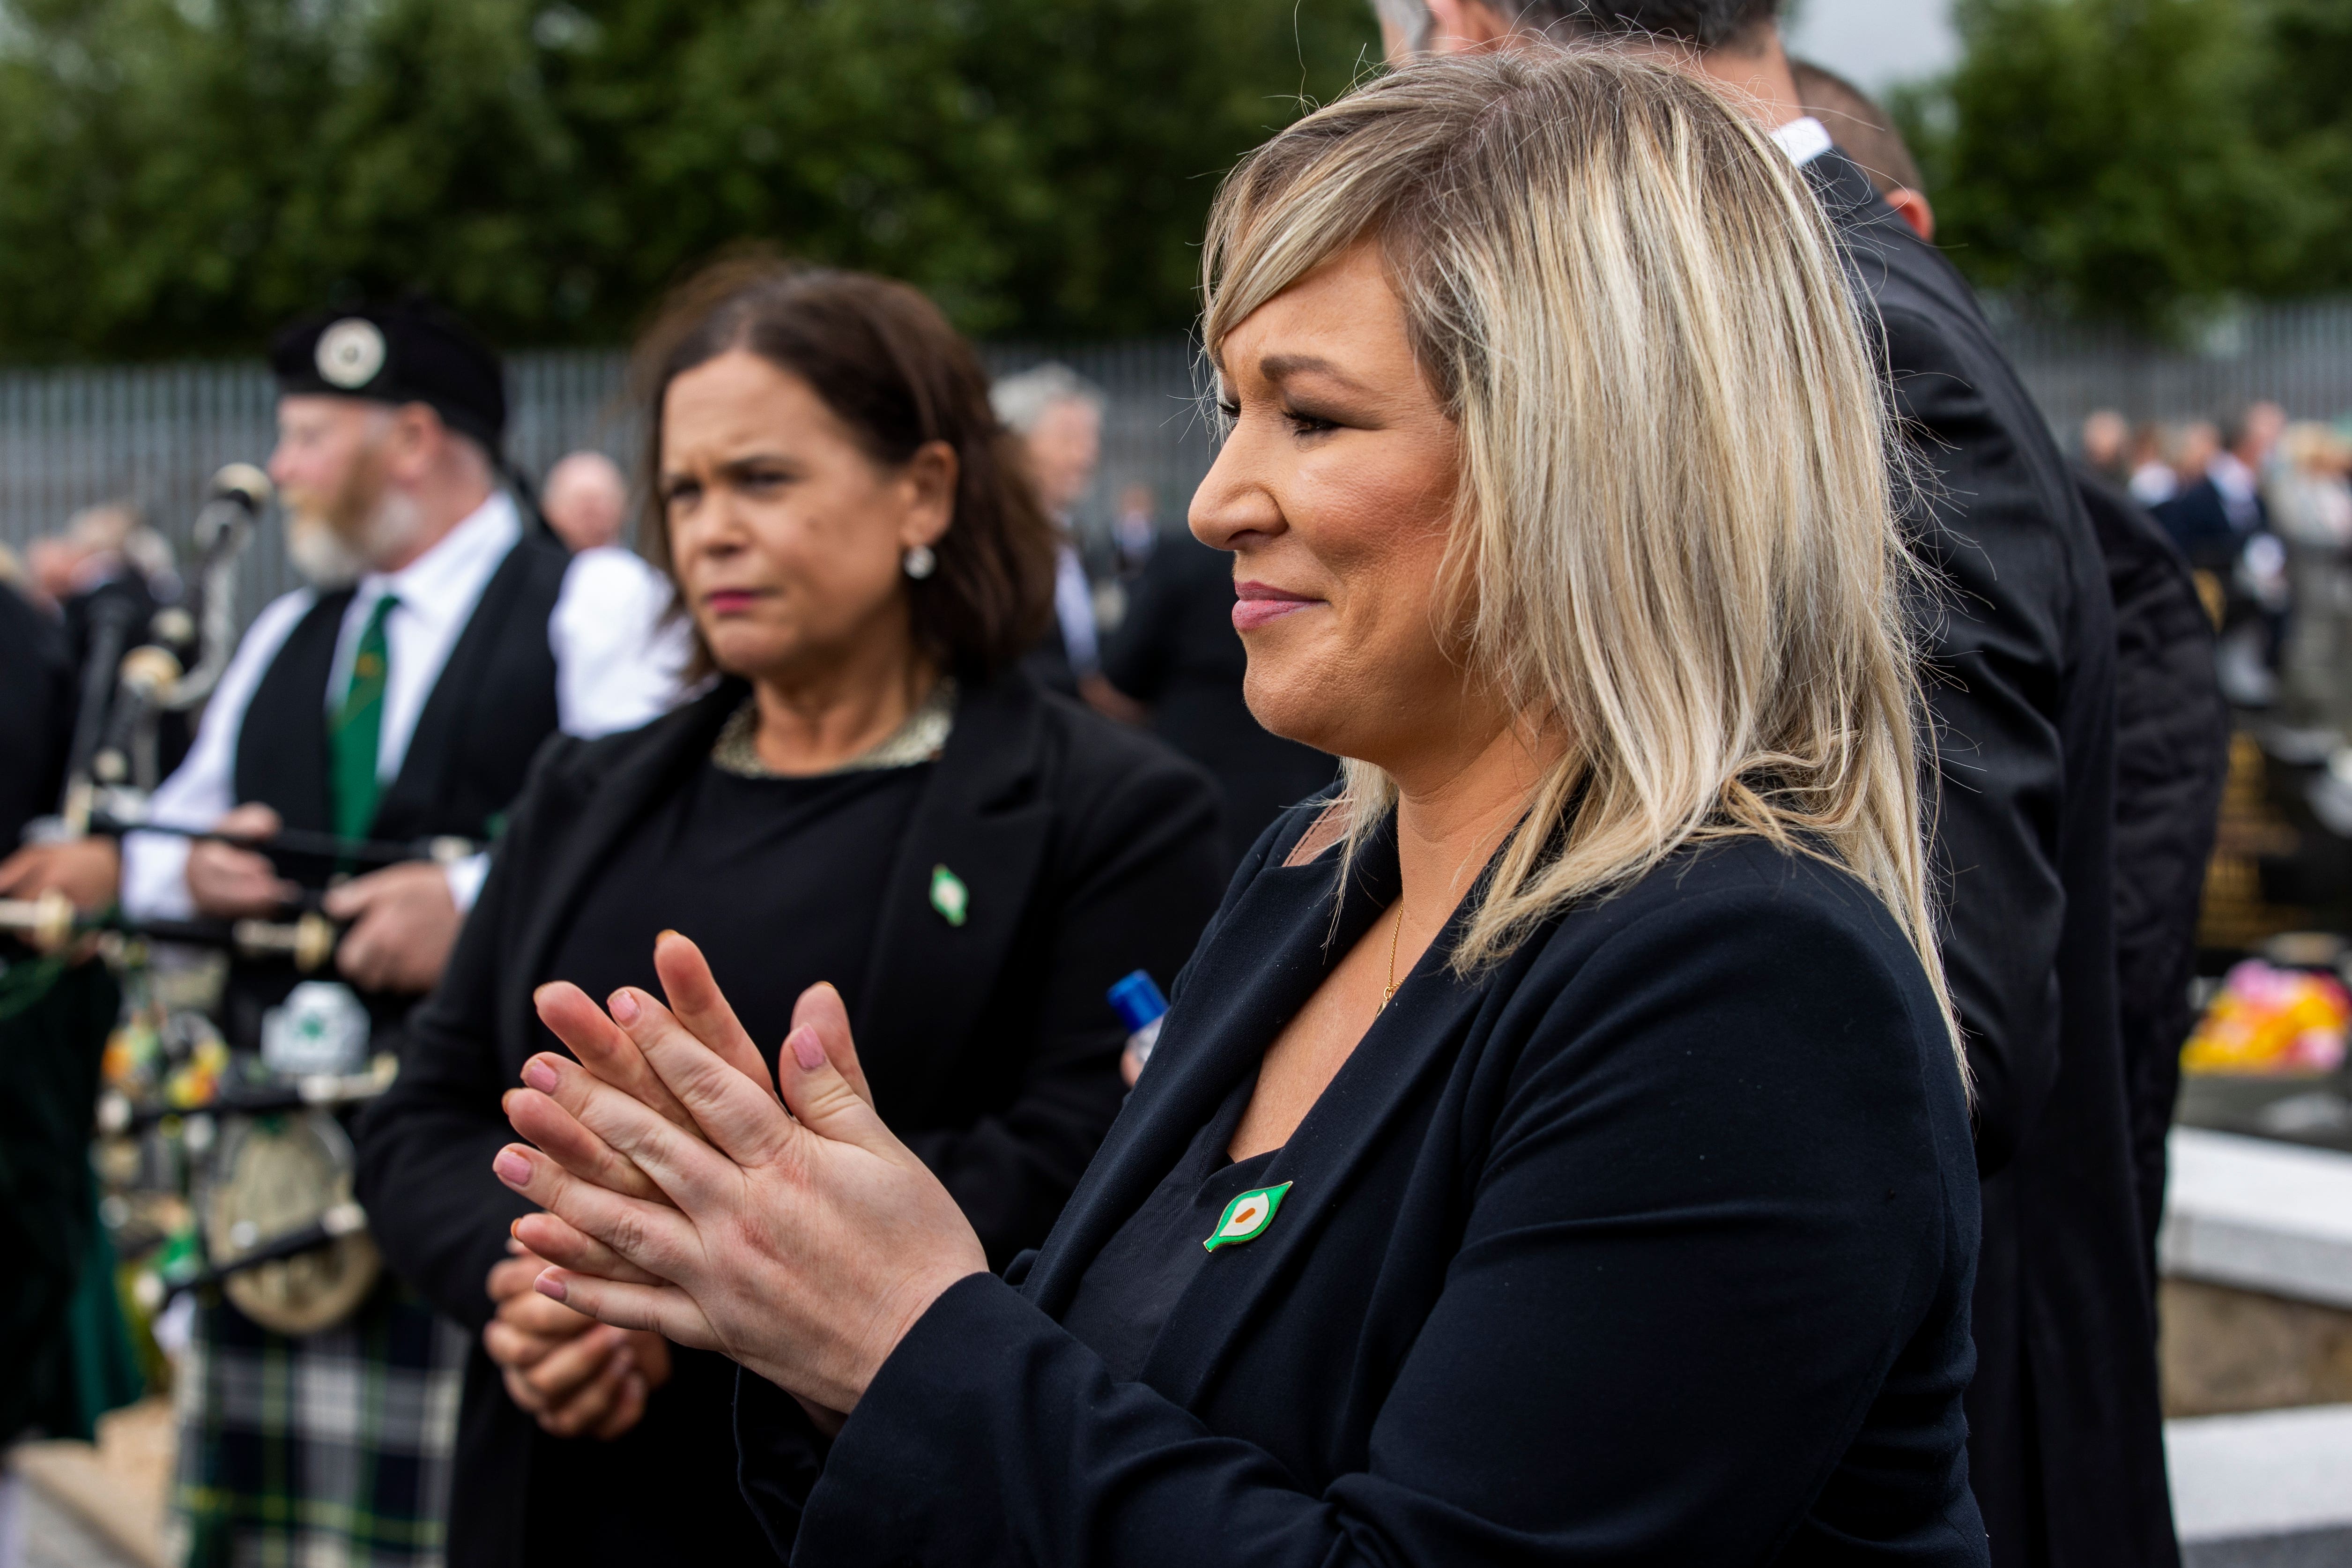 Sinn Fein leader Mary Lou McDonald (left) and former Deputy First Minister Michelle O’Neill during the funeral of senior Irish Republican and former leading IRA figure Bobby Storey in June 2020 (Liam McBurney/PA)